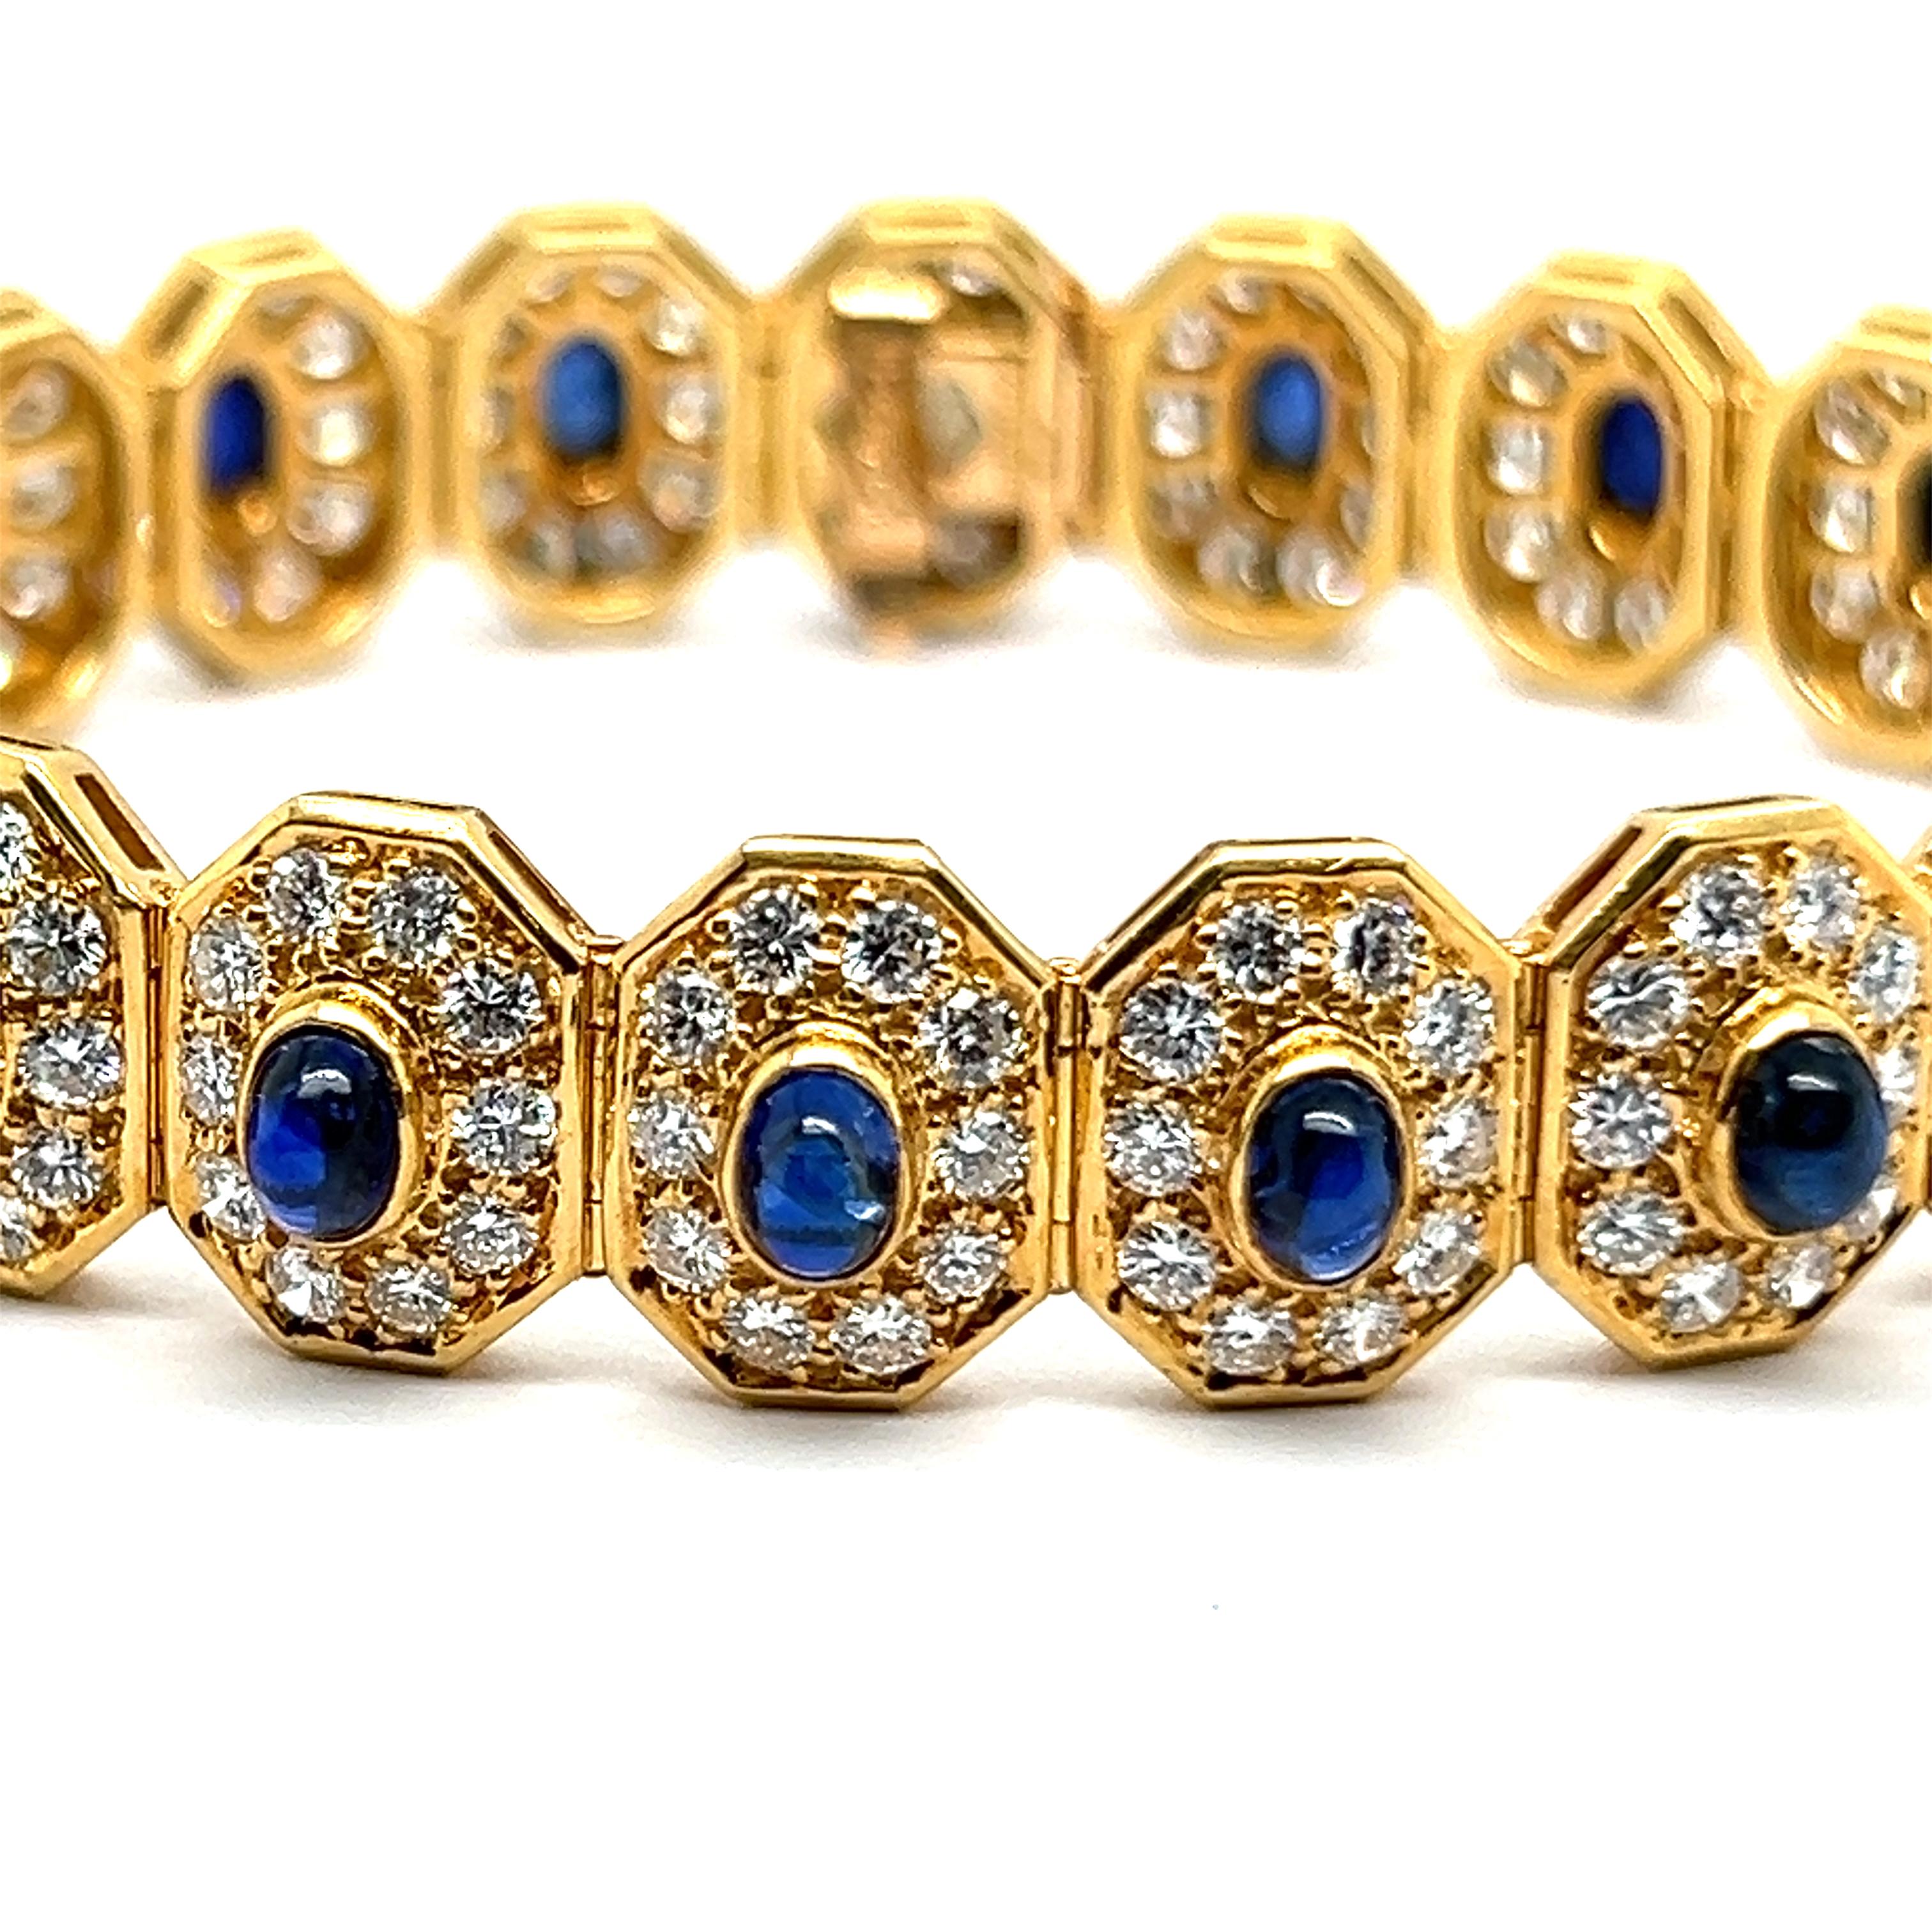 Indulge in the enchanting allure of Piaget's masterpiece: a stunning gold bracelet adorned with sapphires and diamonds. Crafted in exquisite 18 Karat yellow gold, this bracelet features 19 oval-cut sapphires totaling 6.50 carats and 190